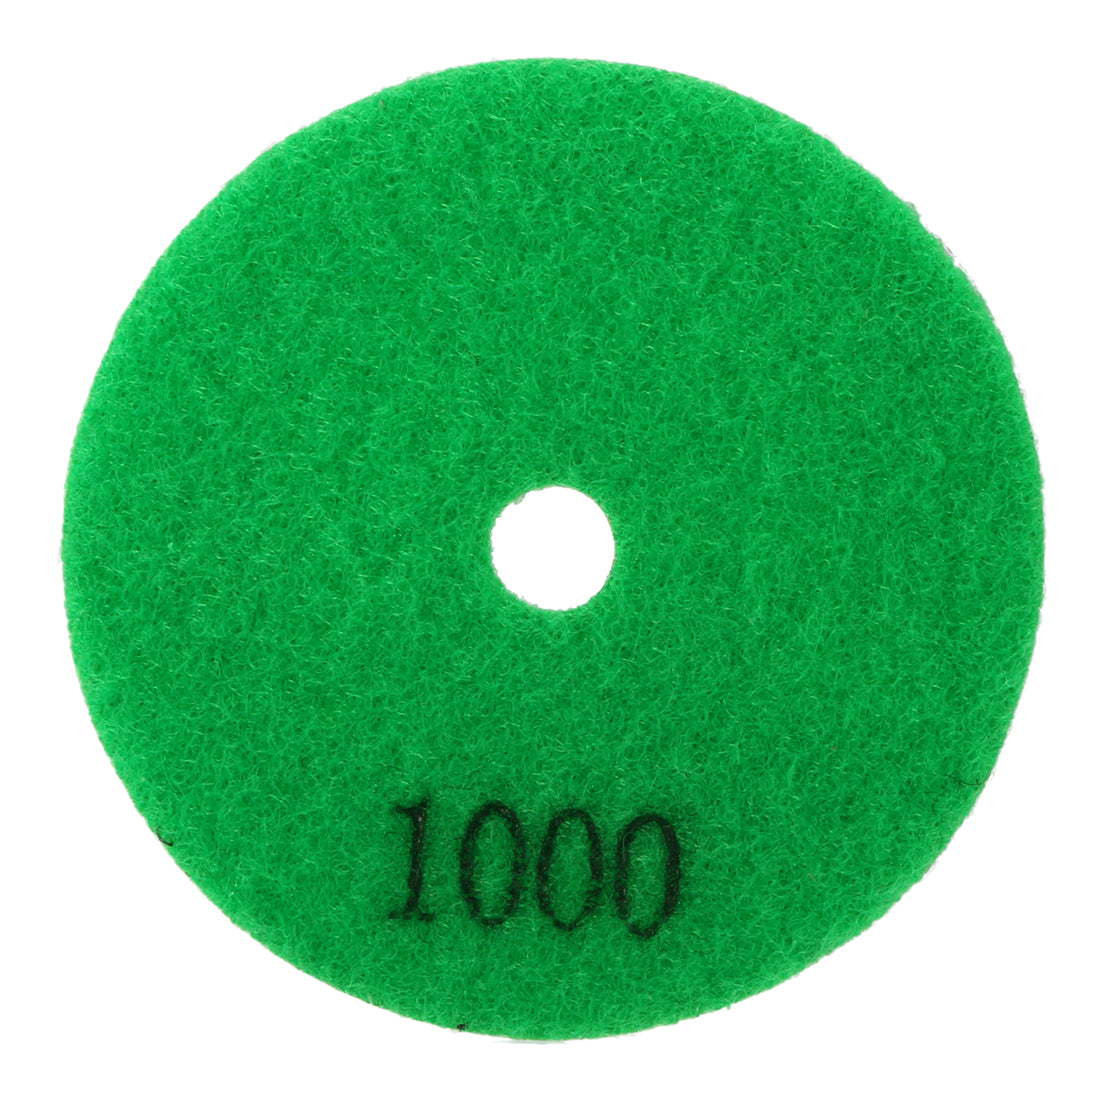 uxcell Uxcell 3-inch Diamond Wet Polishing Pad Grit 1000 10pcs for Granite Concrete Stone